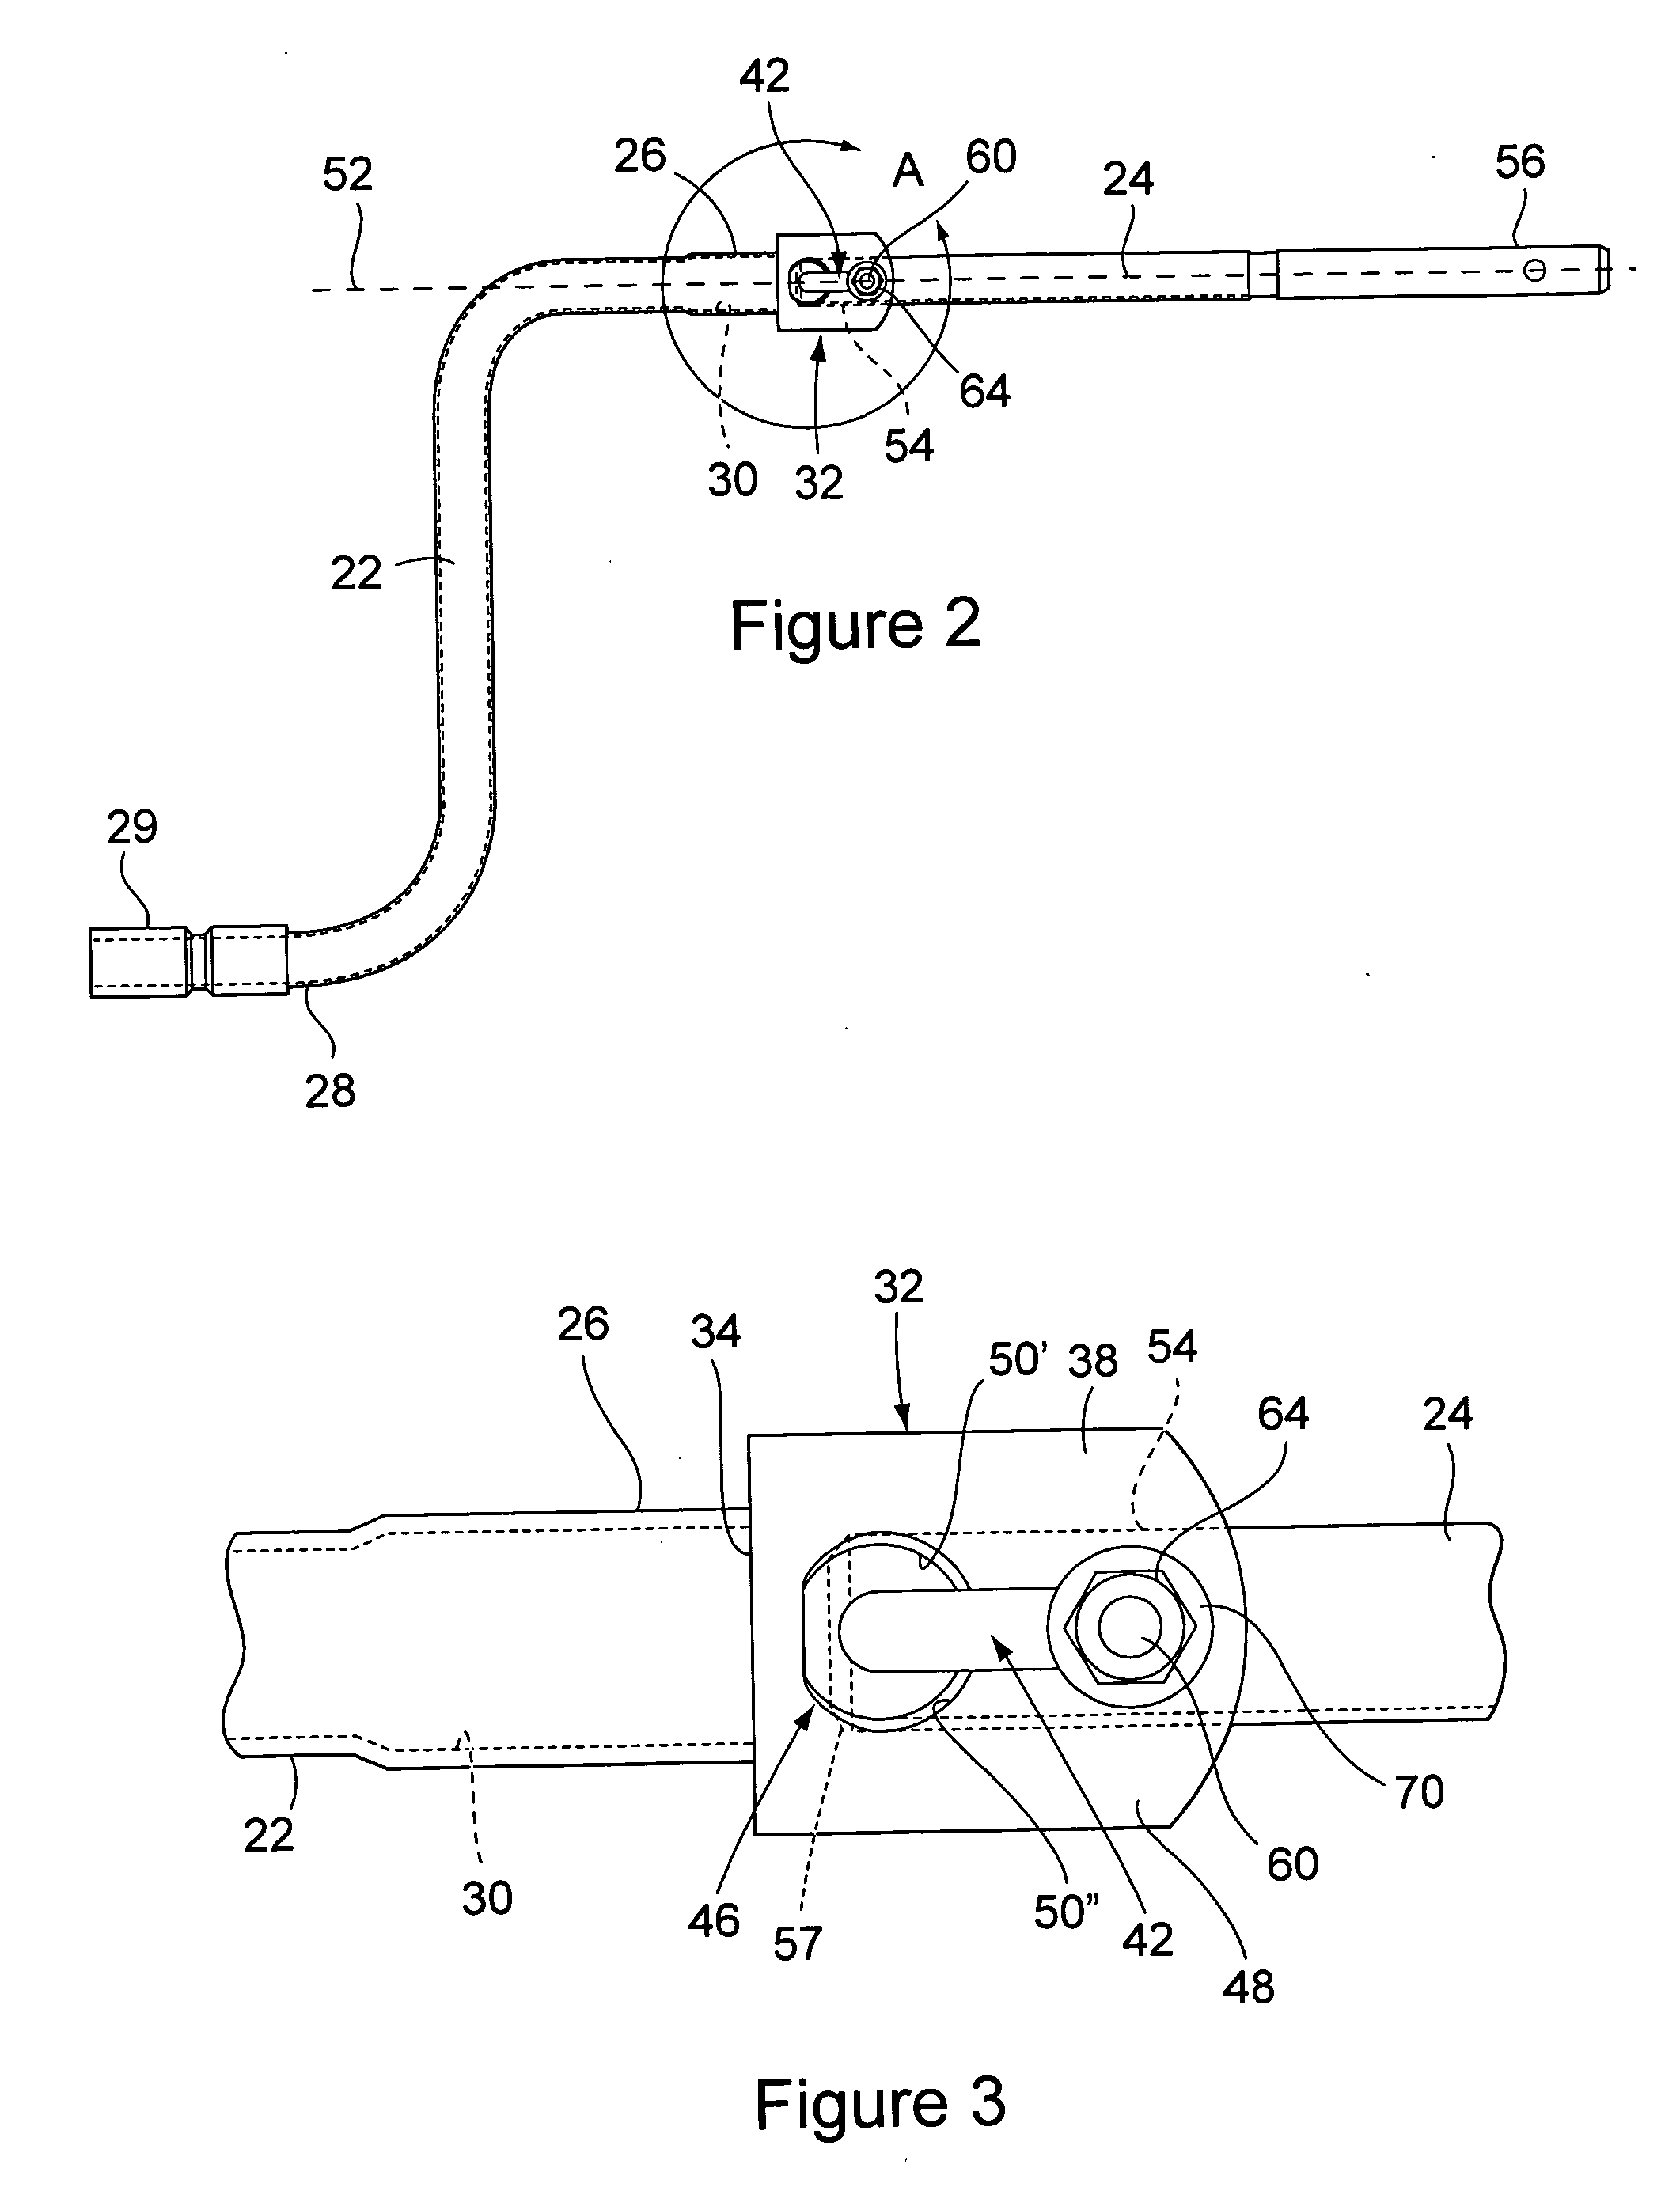 Secure crank locking device for trailer landing gear assembly